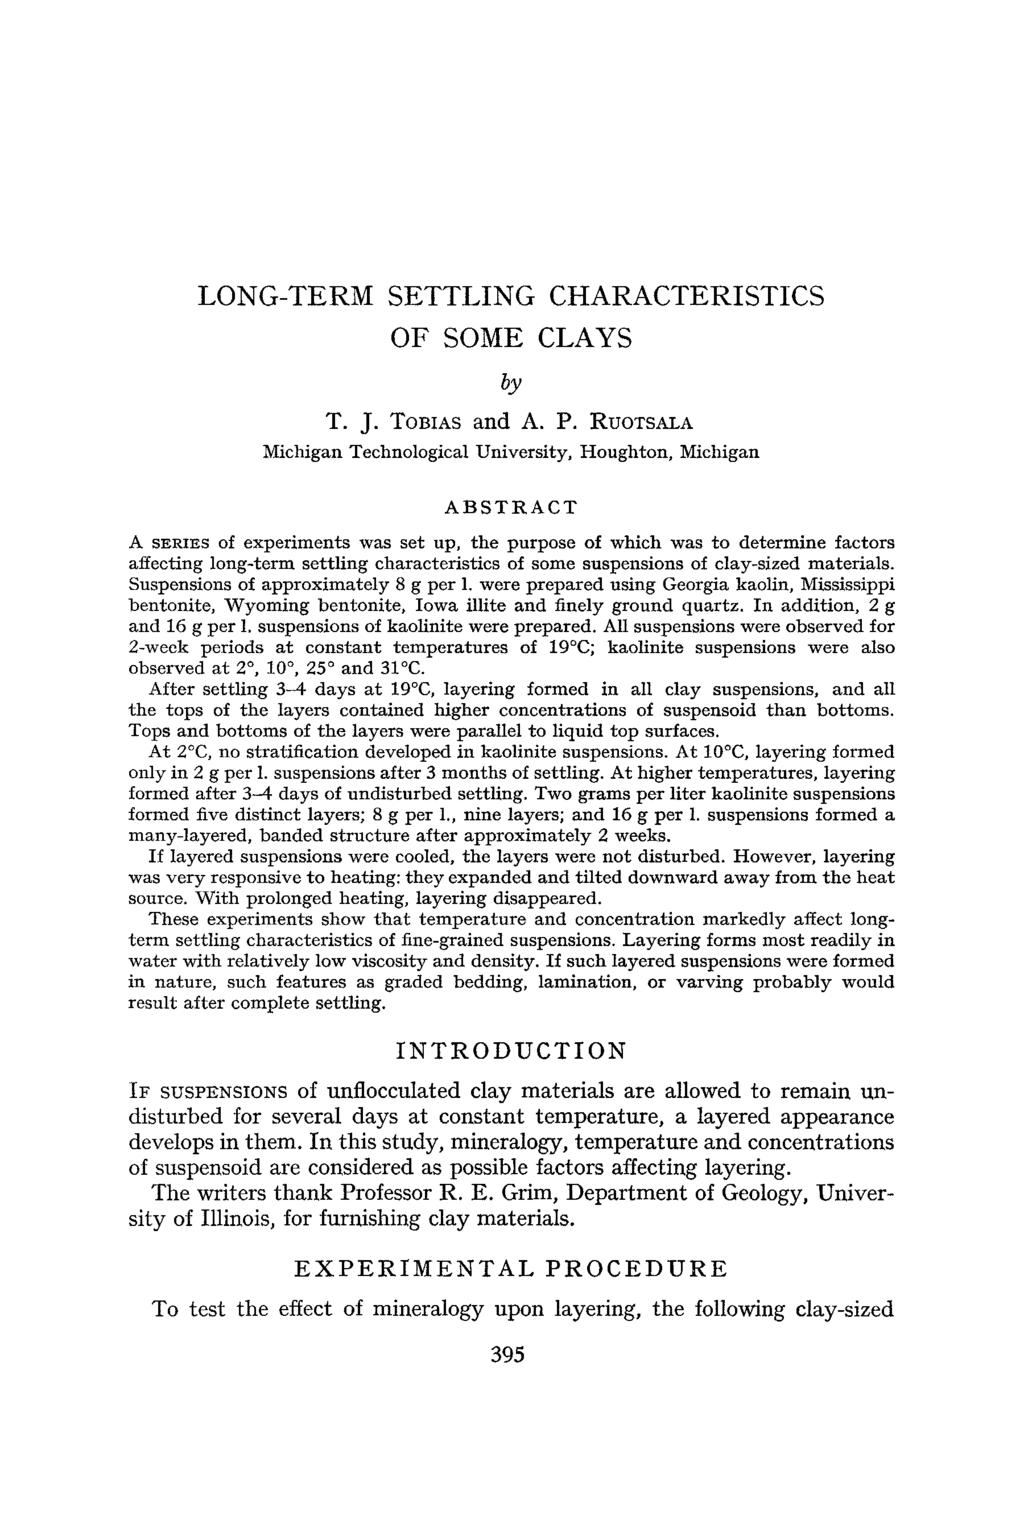 LONG-TERM SETTLING CHARACTERISTICS OF SOME CLAYS by T. J. TOBIAS and A. P.